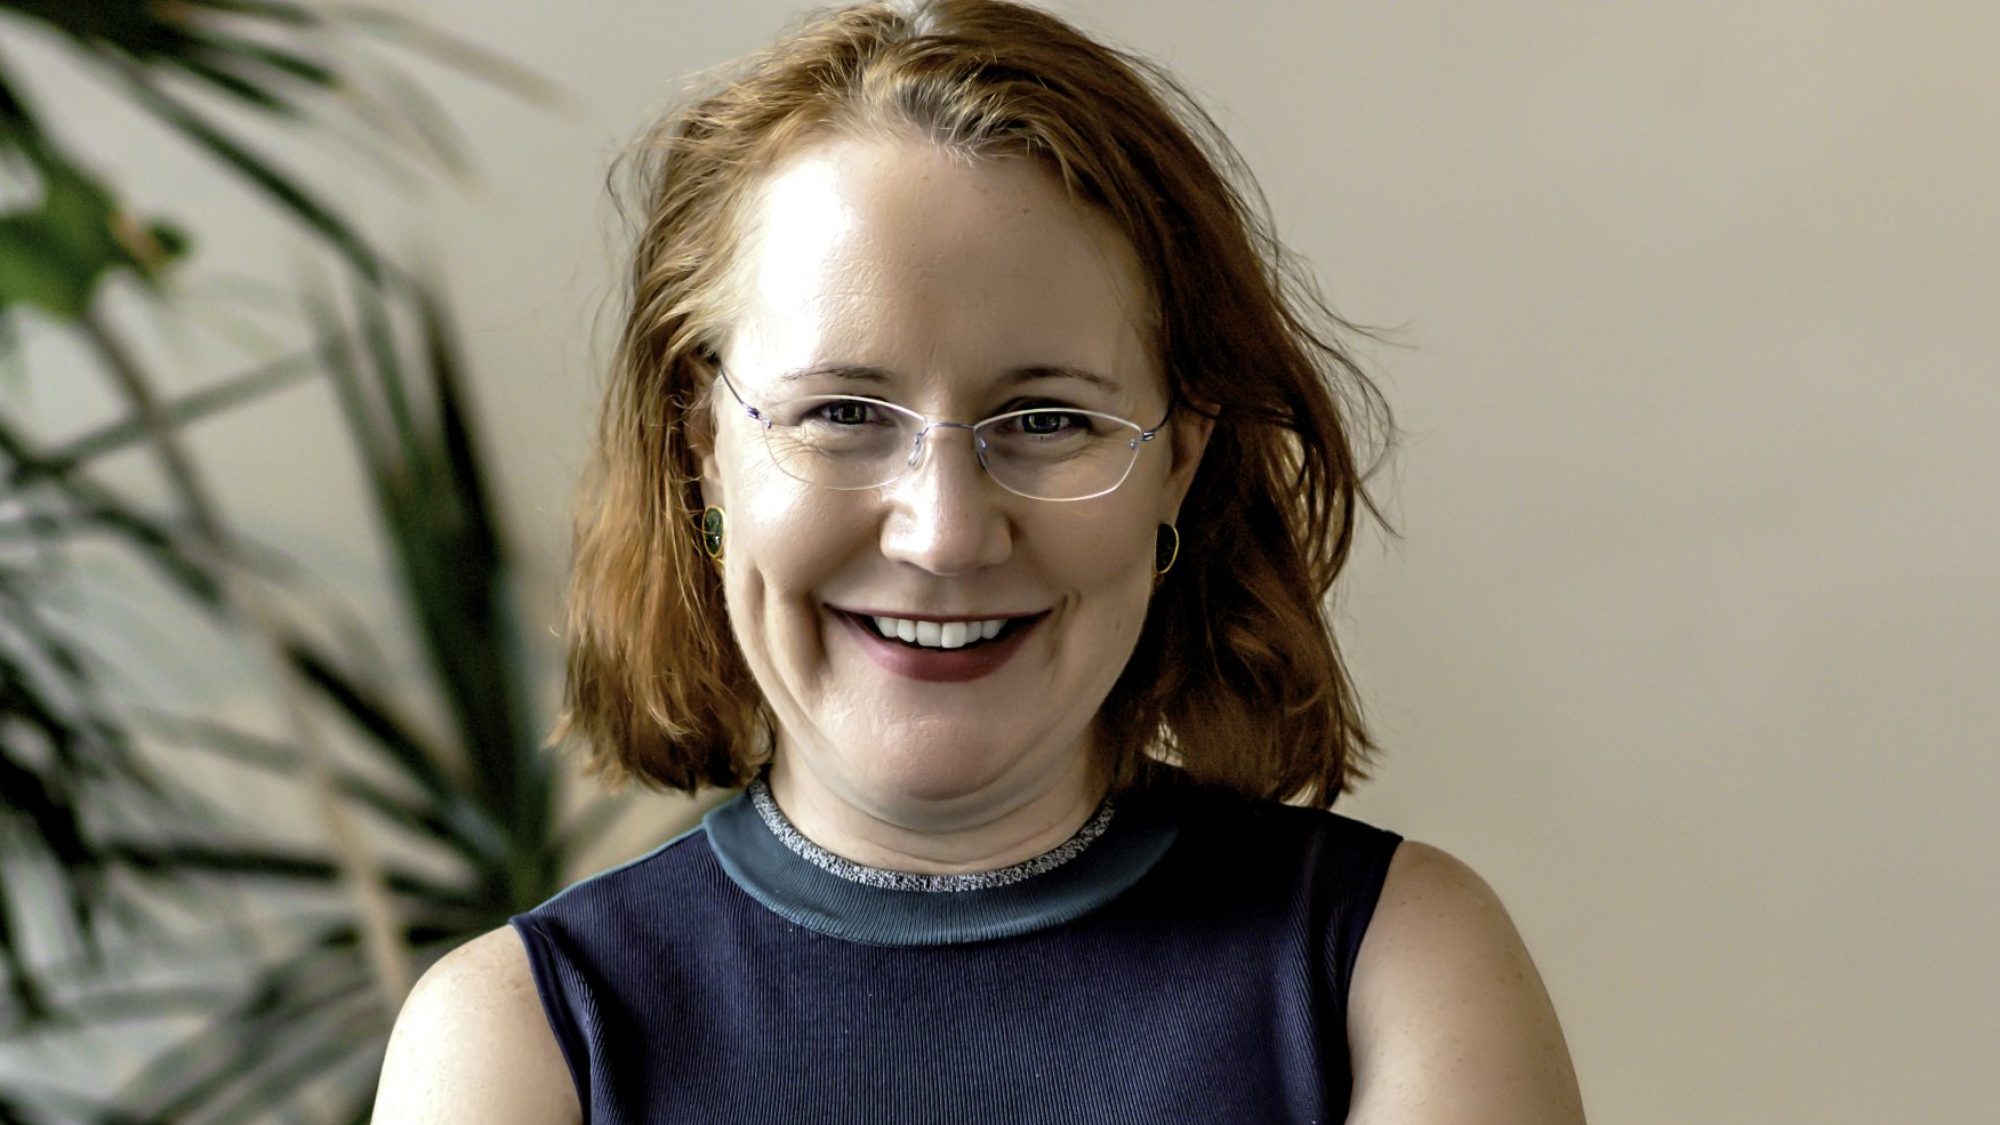 Woman with shoulder-length red hair and glasses smiles while folding her arms in front of a tropical potted plant